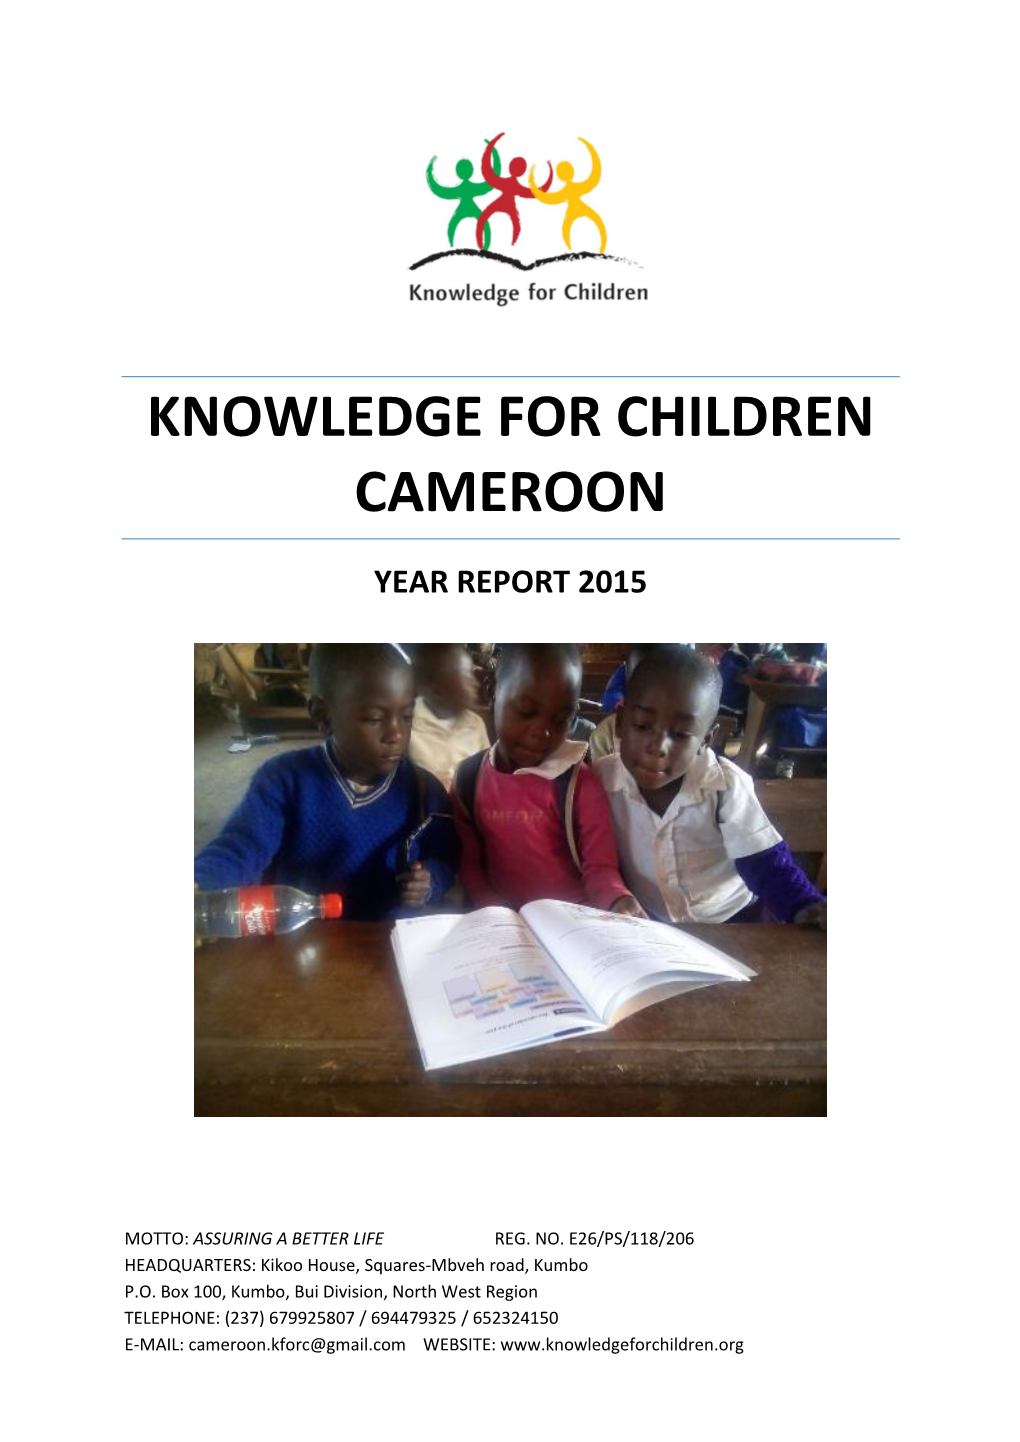 Year Report 2015 Knowledge for Children Cameroon